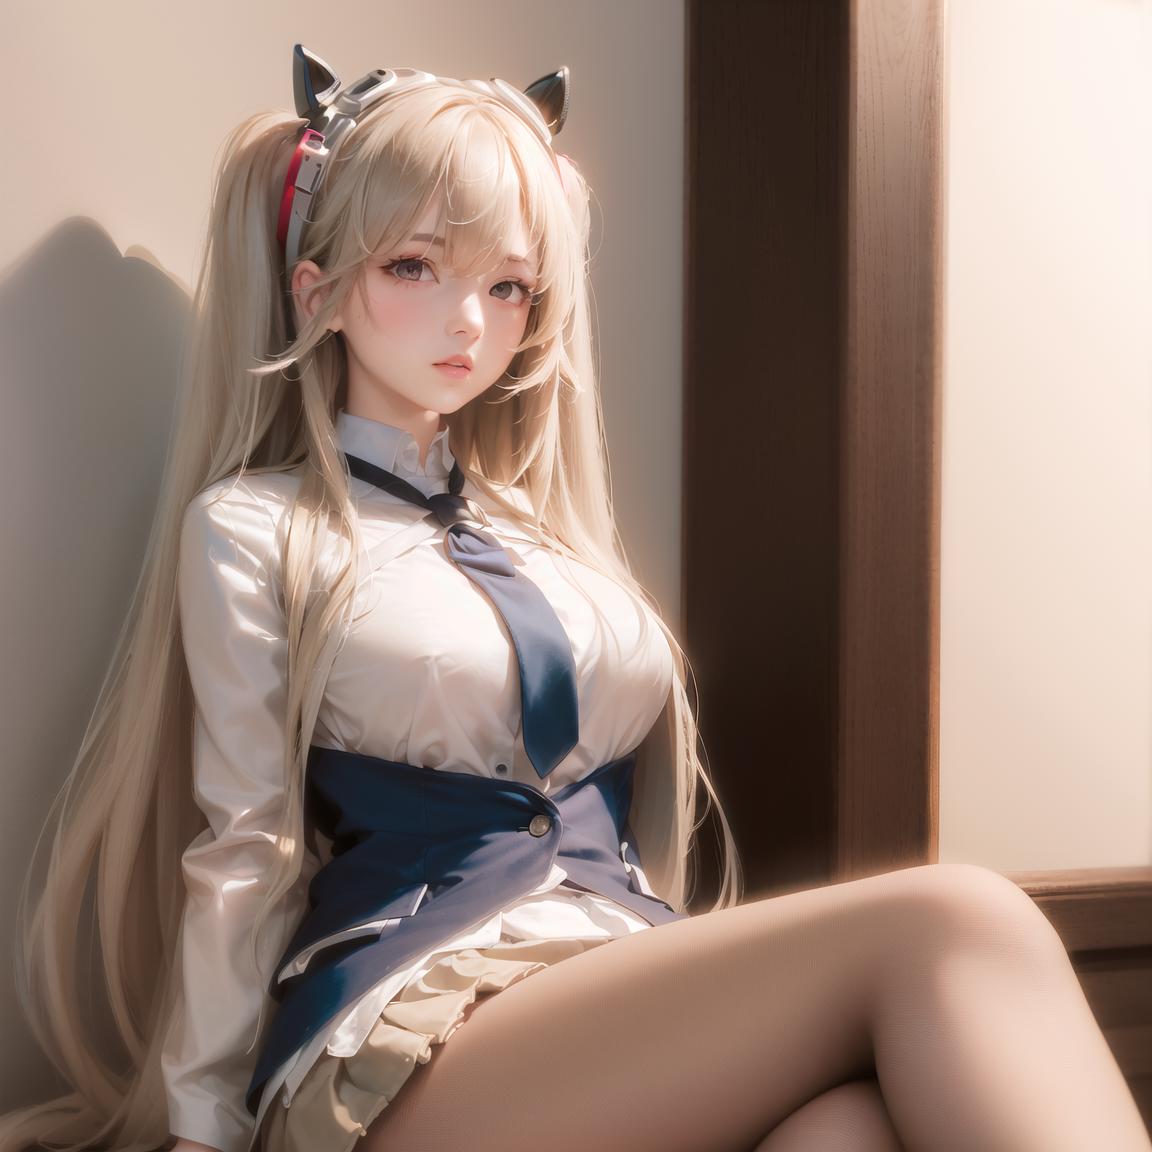 AI model image by A9616777